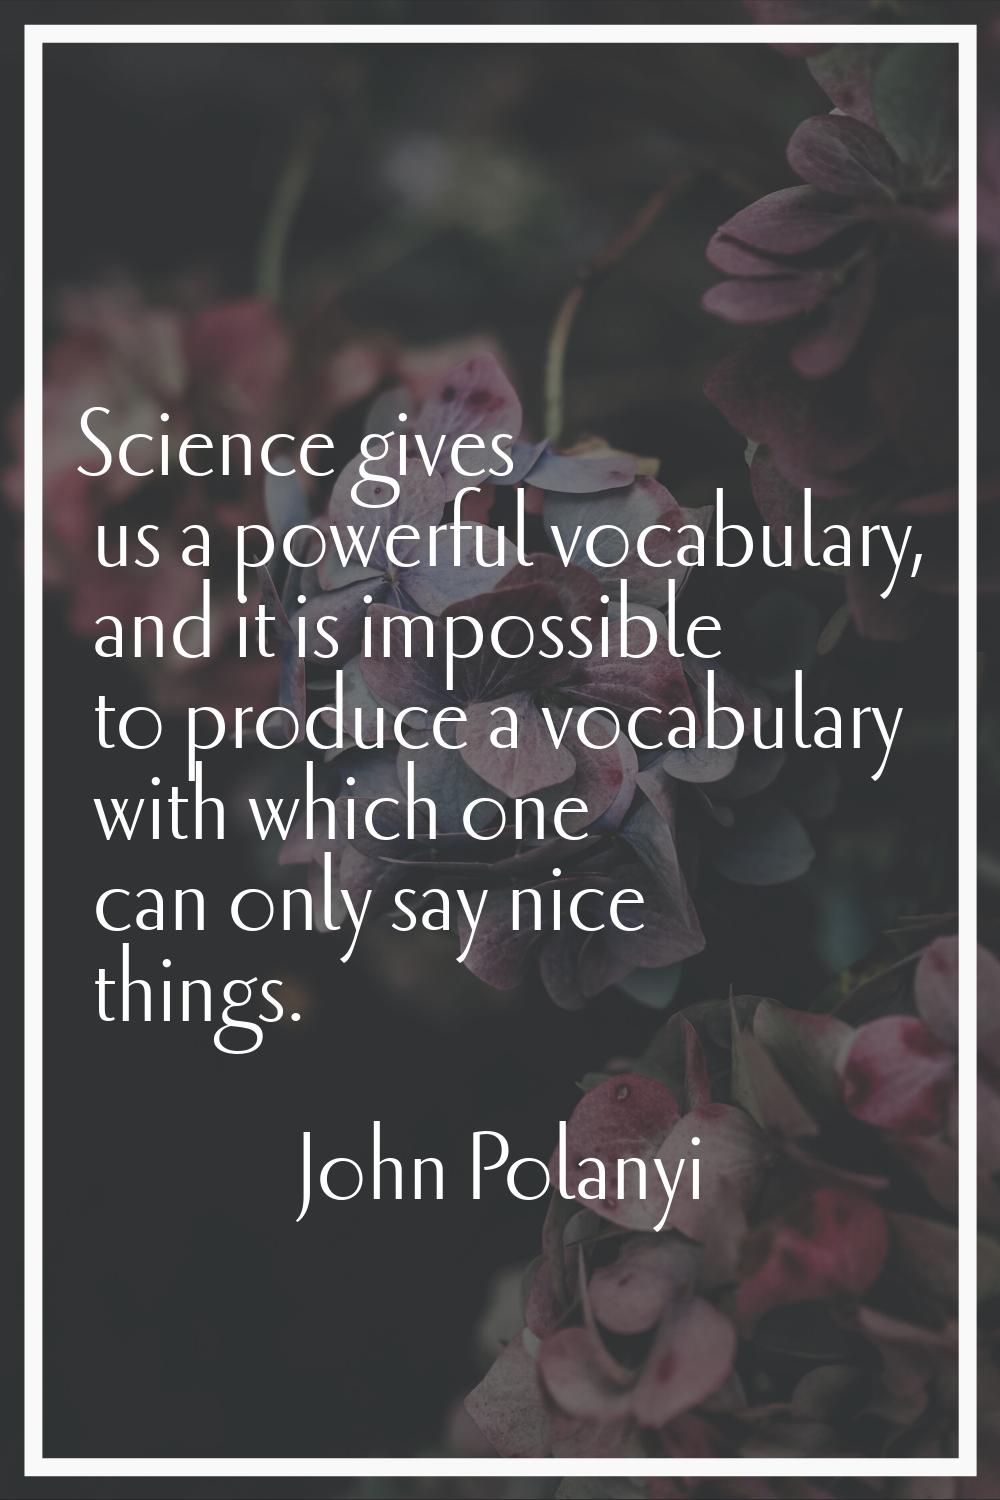 Science gives us a powerful vocabulary, and it is impossible to produce a vocabulary with which one